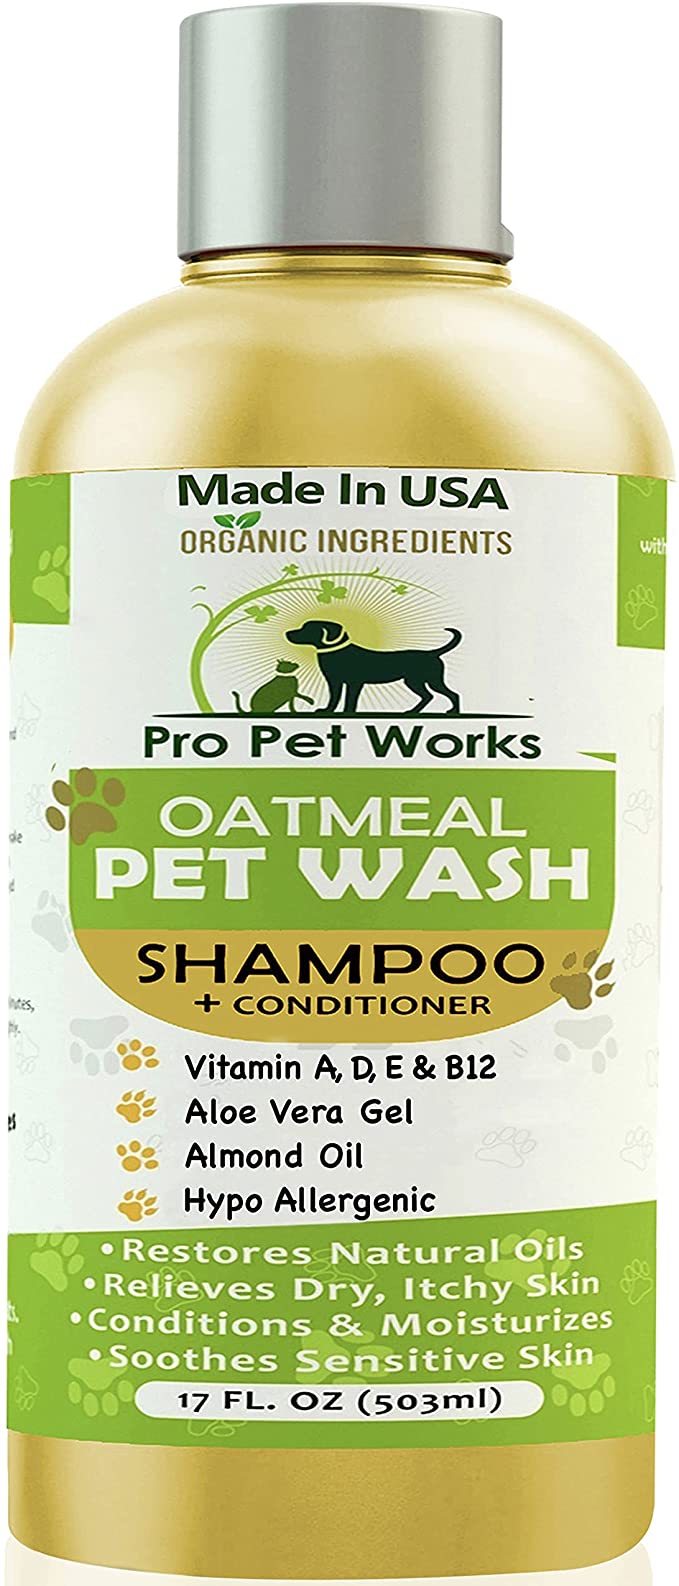 Pro Pet Works Natural Organic 5 in 1 Oatmeal Dog Shampoo and Conditioner-Dog Grooming Supplies for Smelly Dogs-Tearless Blend for Allergies & Itchy Dry Sensitive Skin-17oz (Soap Free)